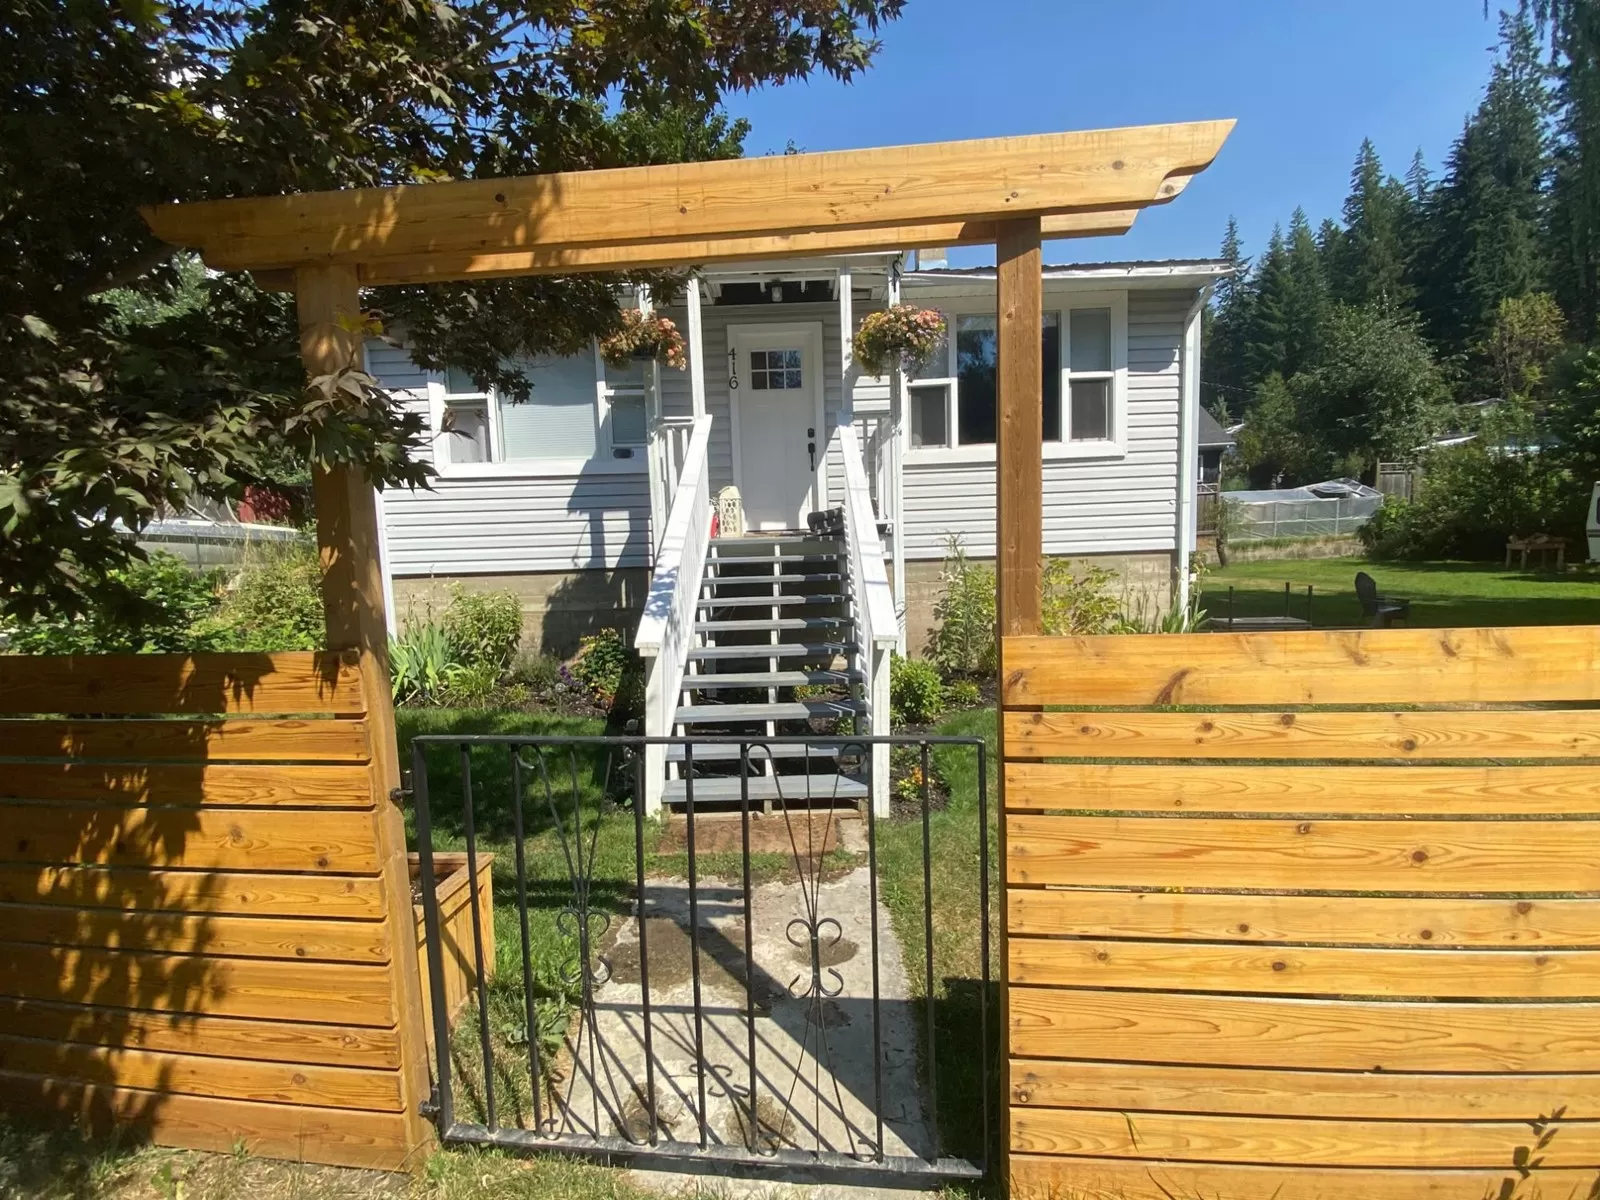 House for rent: 416 Fowler Street, Riondel, British Columbia V0B 2B0